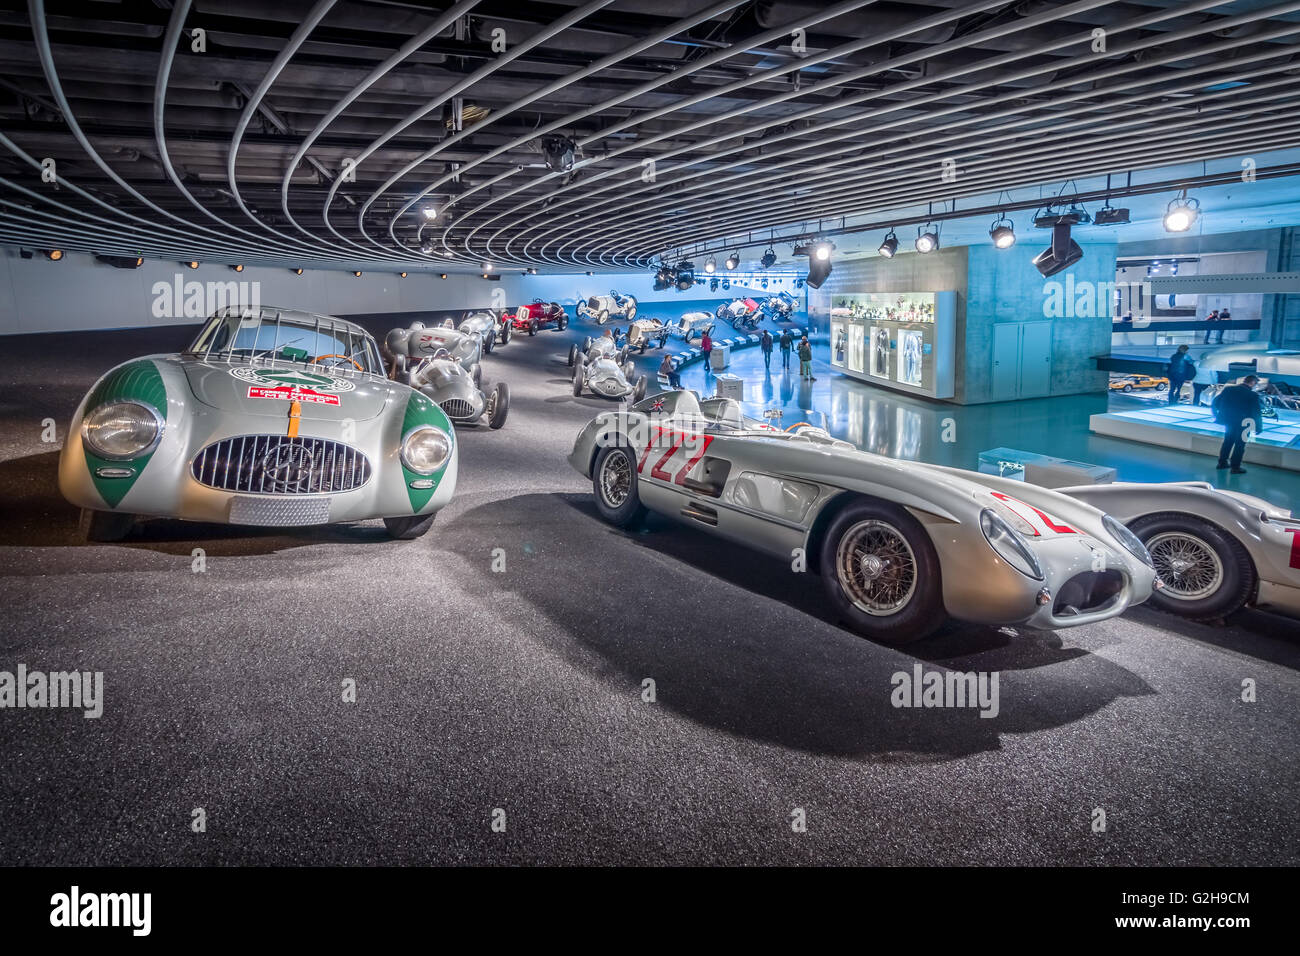 STUTTGART, GERMANY- MARCH 19, 2016: Gallery of sports and racing cars of different classes. HDRi. Mercedes-Benz Museum. Stock Photo